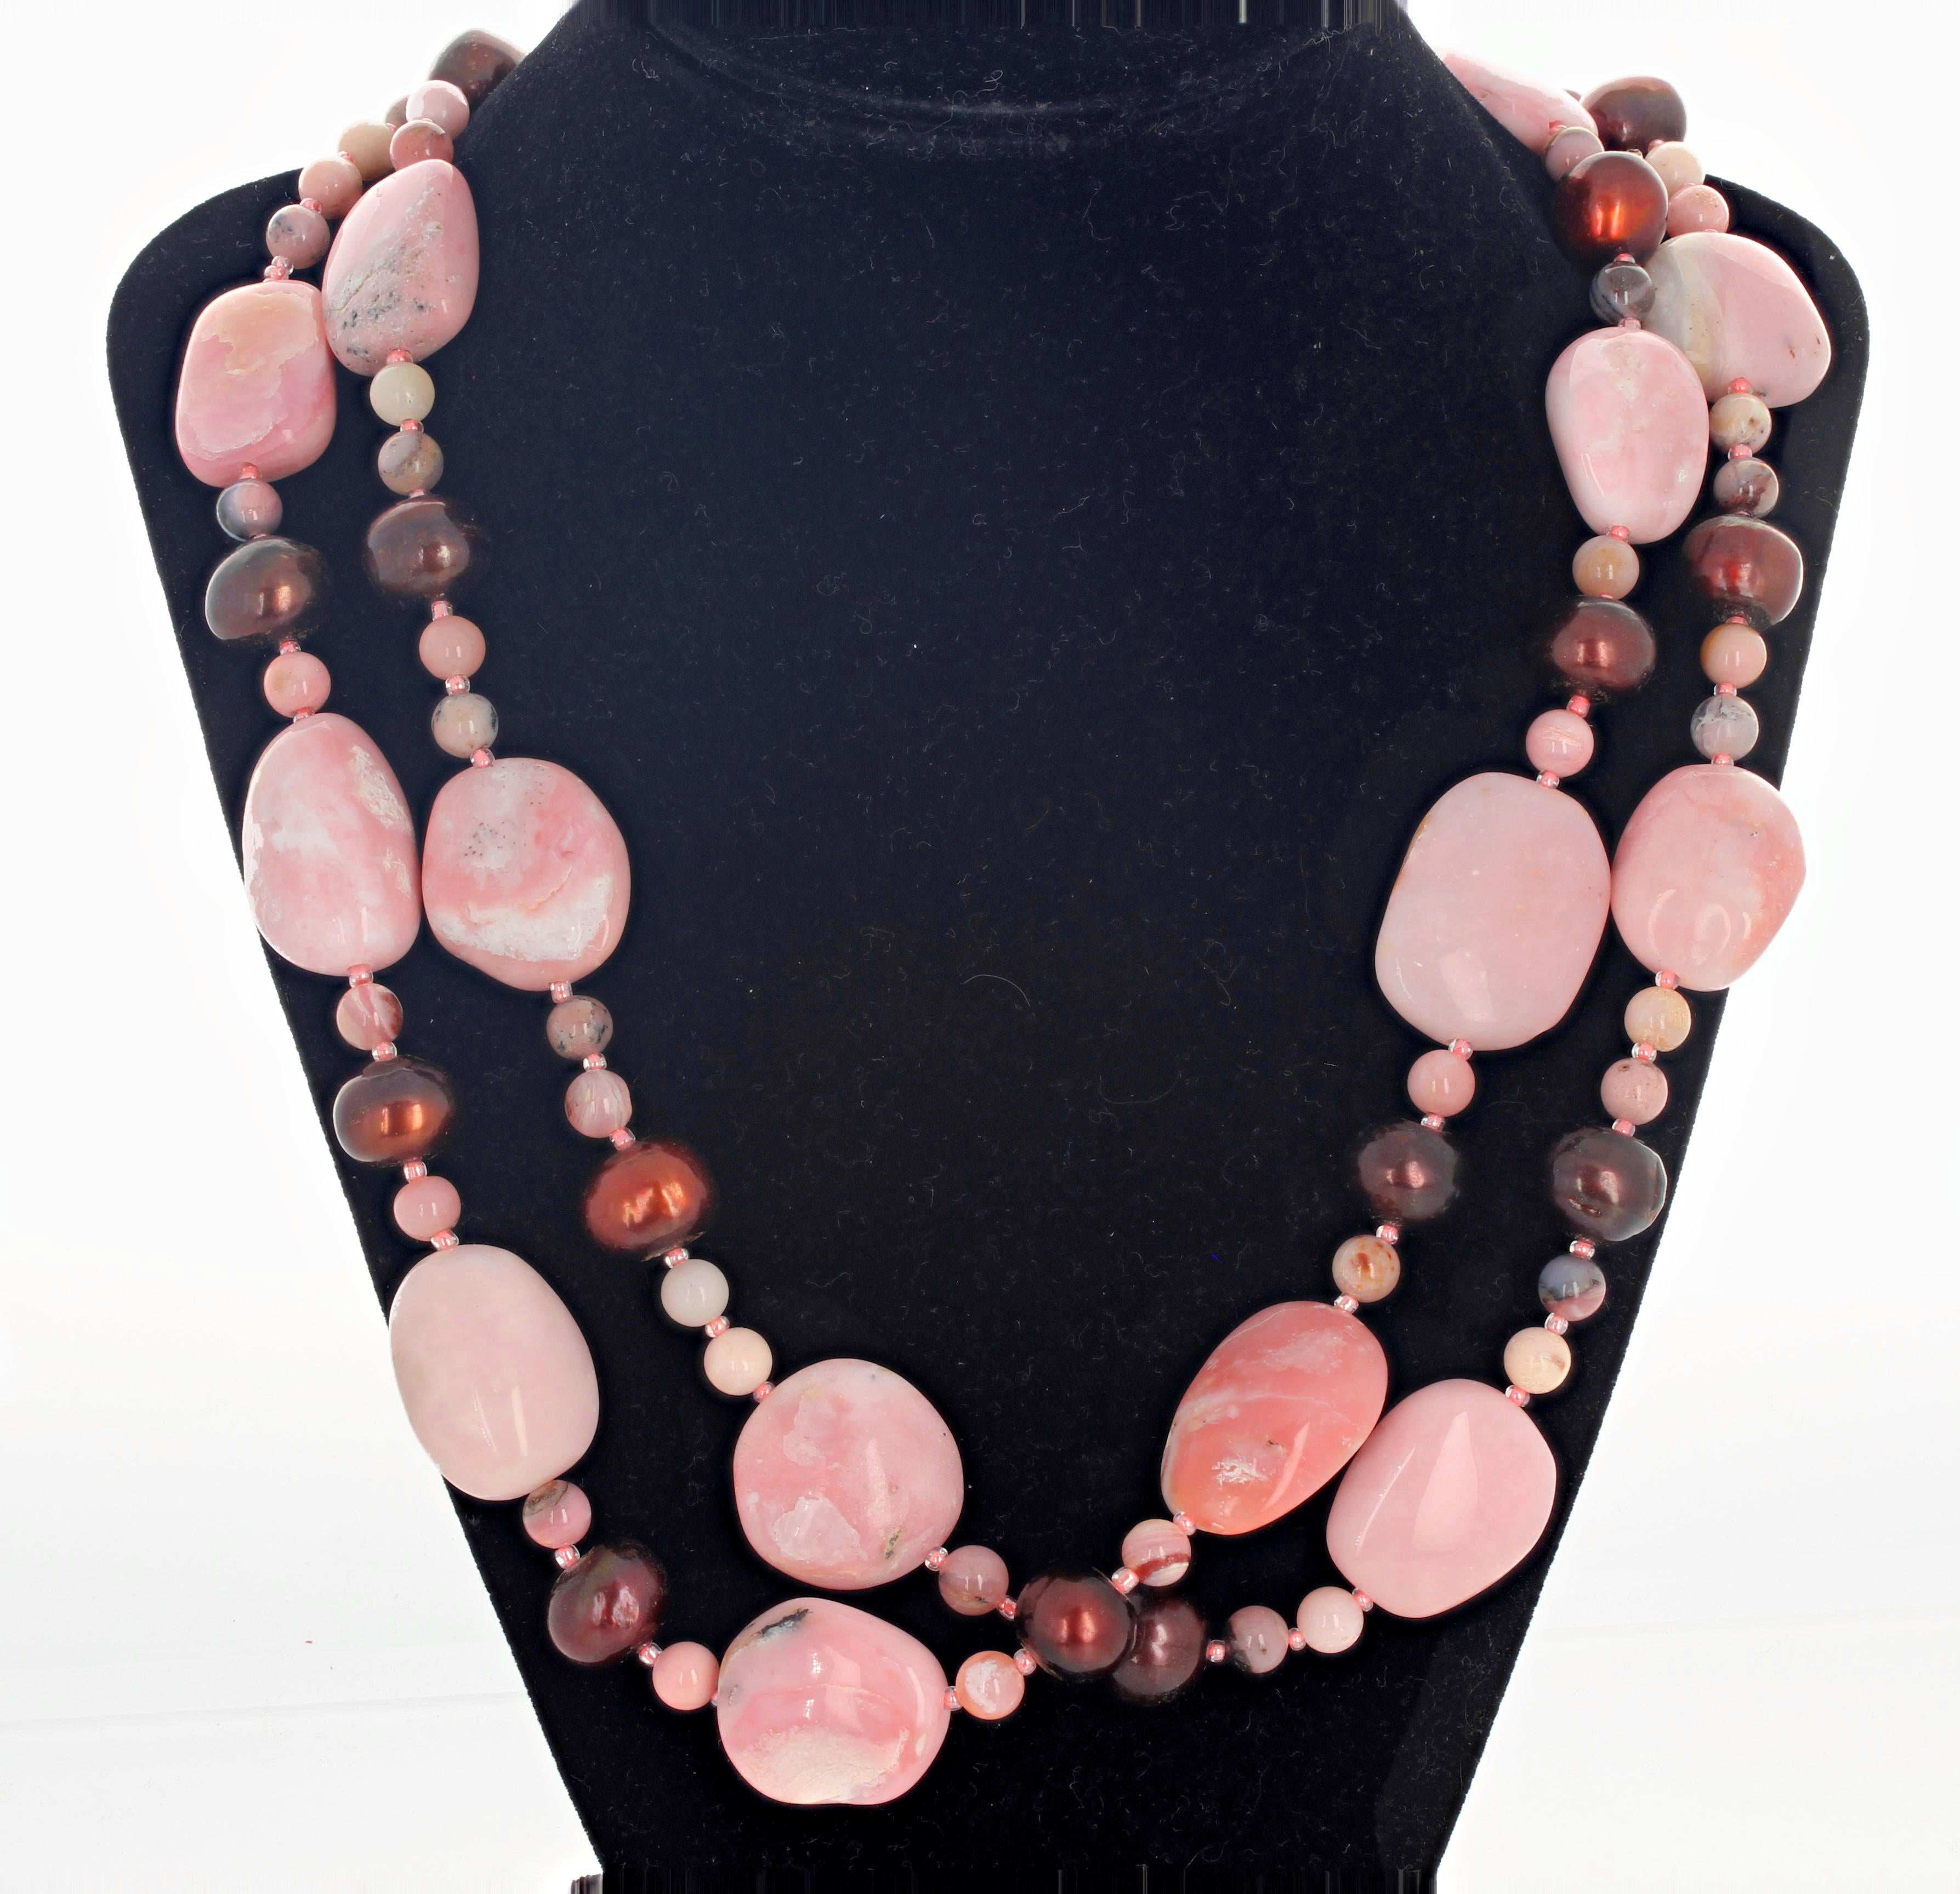 Double strand of highly polished glamorous RARE natural pink Peruvian Opals enhanced with coppery colored cultured Pearls set with a hook clasp - so easy to take on and off - in this 20.5 inch long necklace..  The largest Opal is 27 mm x 20.5 mm.  